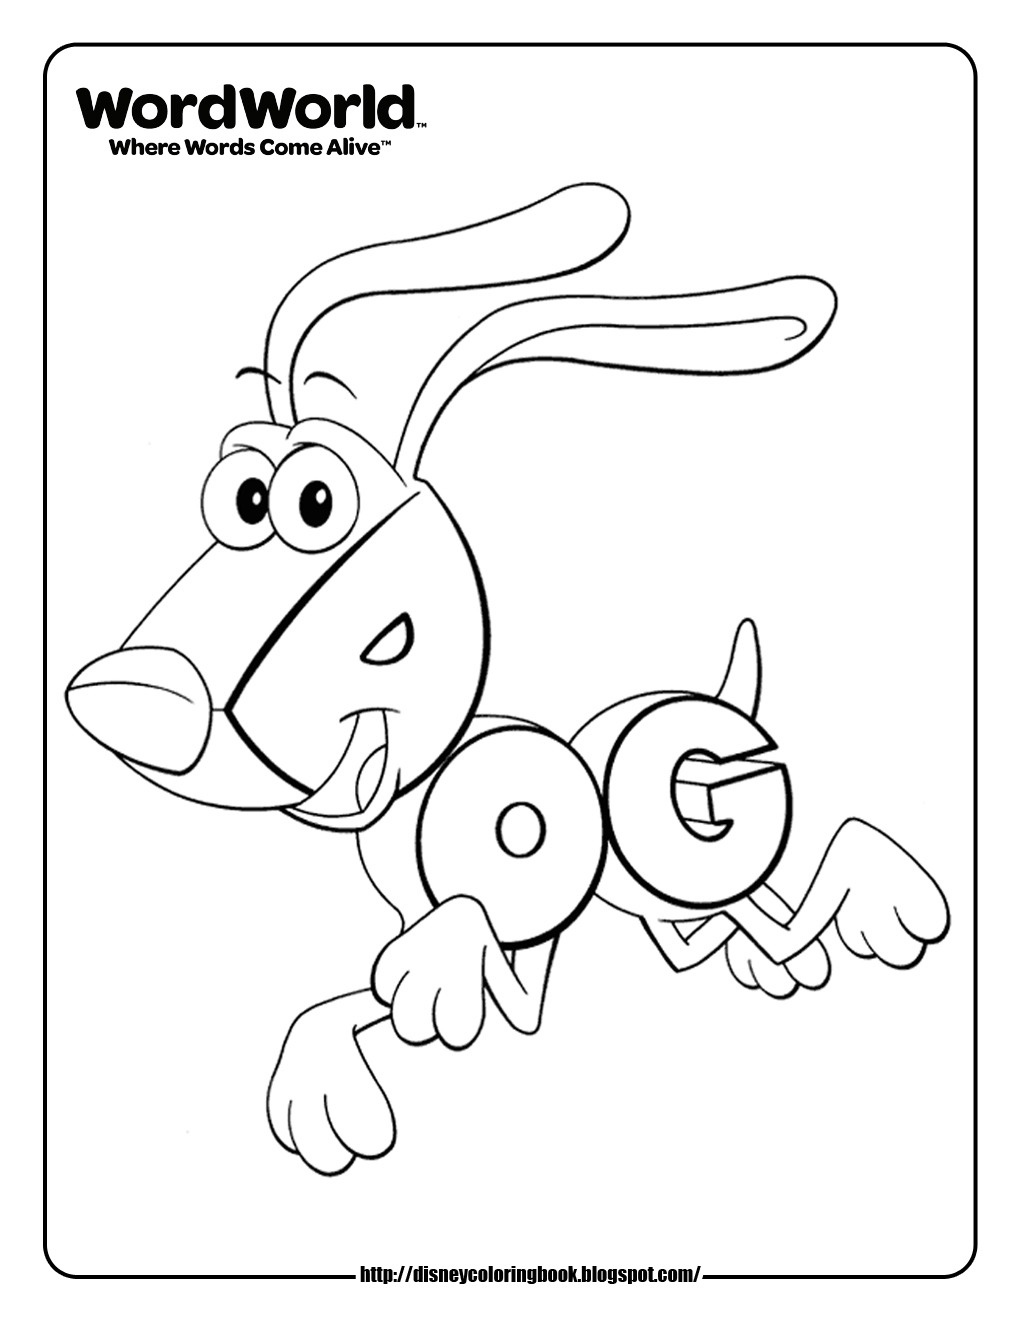 1 Year Old Coloring Pages at GetColorings.com | Free printable